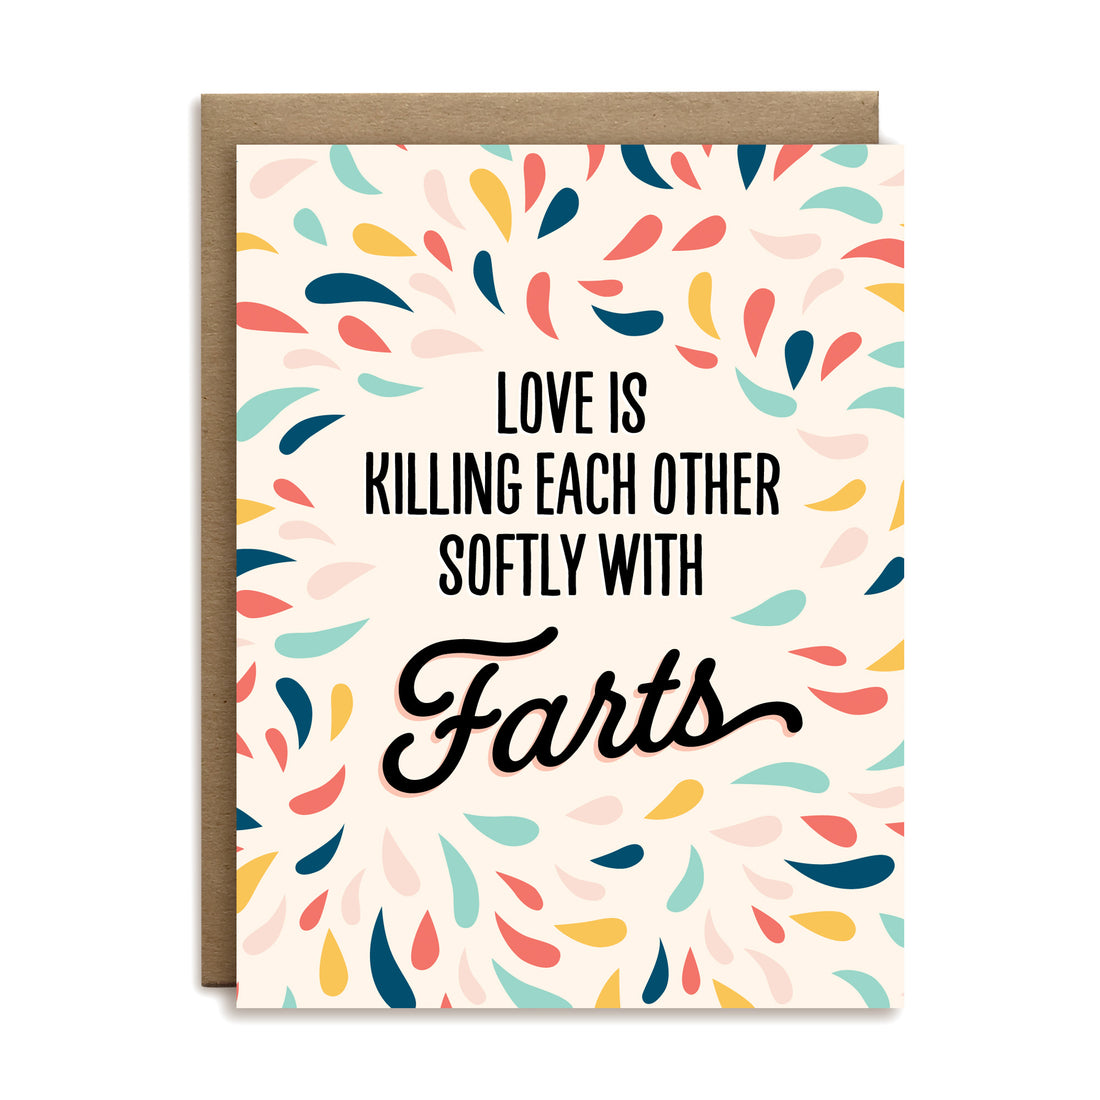 Love is killing each other softly with farts greeting card by I&